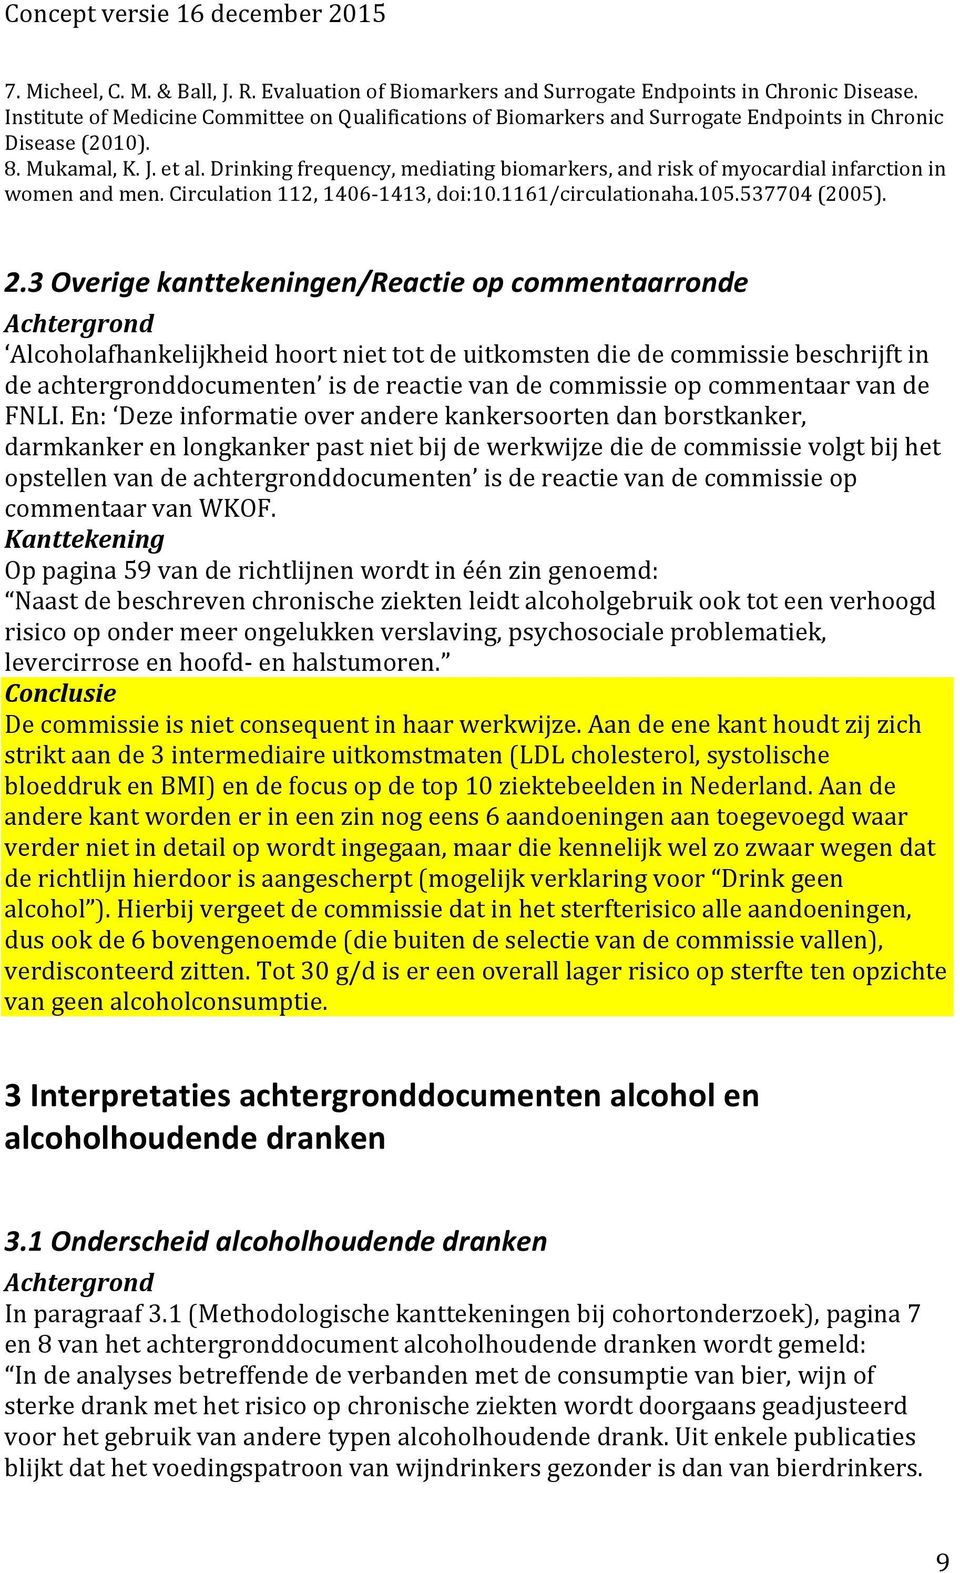 Drinking frequency, mediating biomarkers, and risk of myocardial infarction in women and men. Circulation 112, 1406-1413, doi:10.1161/circulationaha.105.537704 (2005). 2.